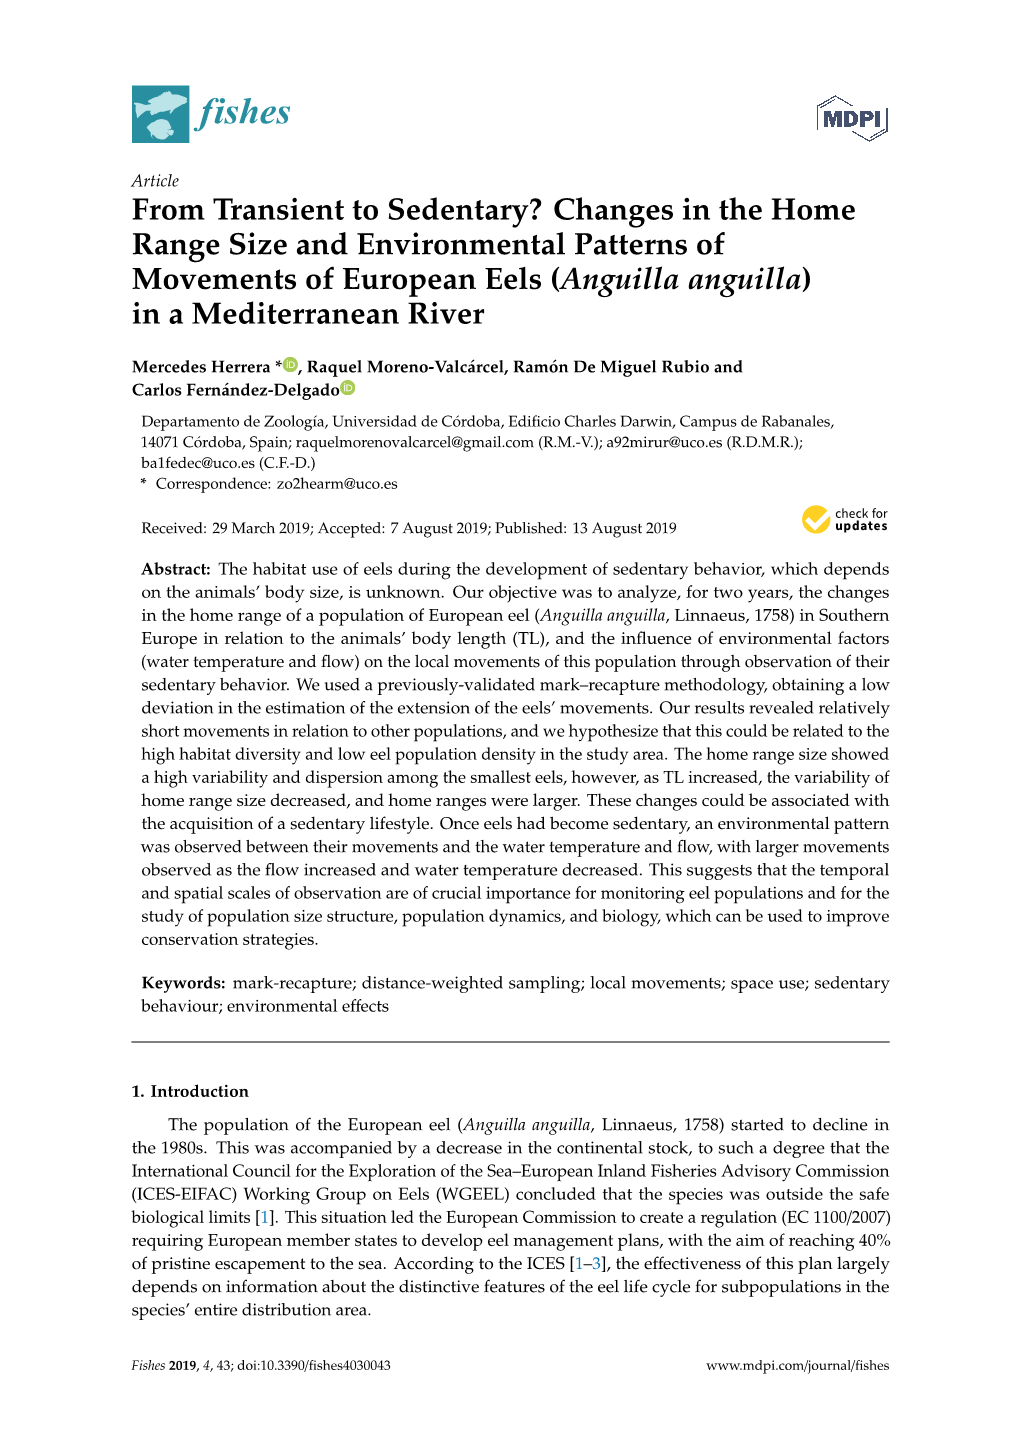 Changes in the Home Range Size and Environmental Patterns of Movements of European Eels (Anguilla Anguilla) in a Mediterranean River